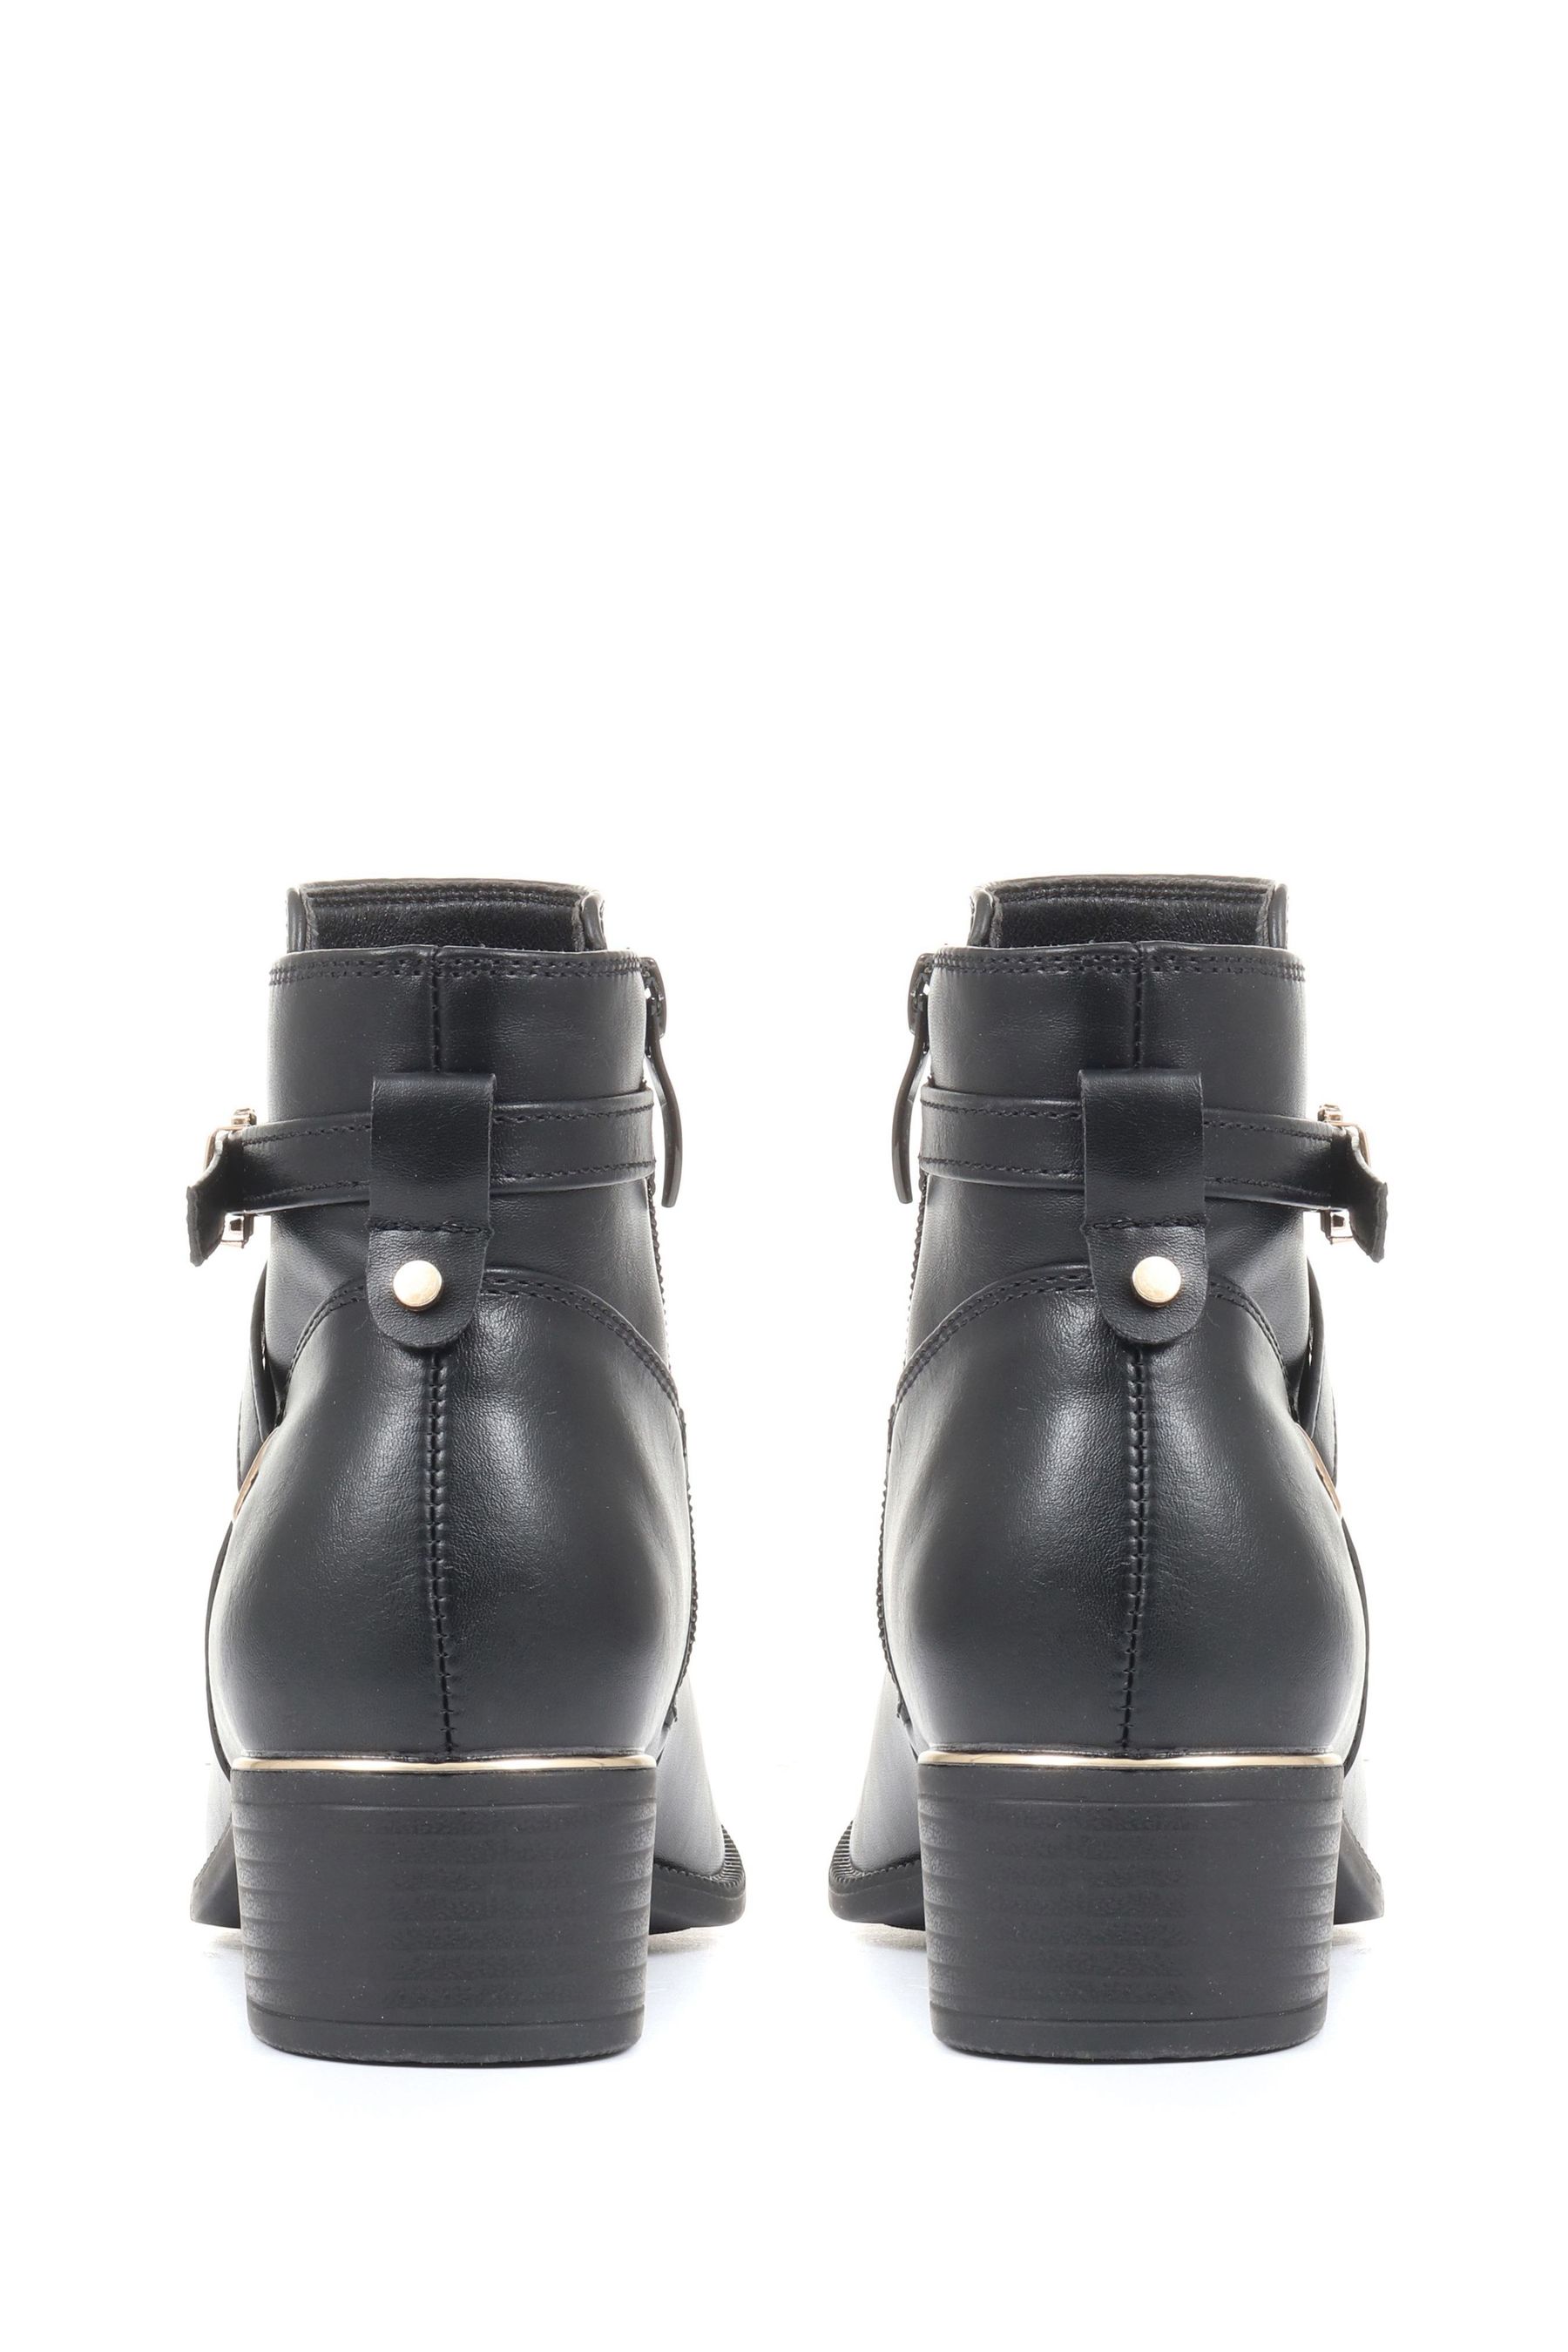 Buy Pavers Black Buckle Ankle Boots from the Next UK online shop